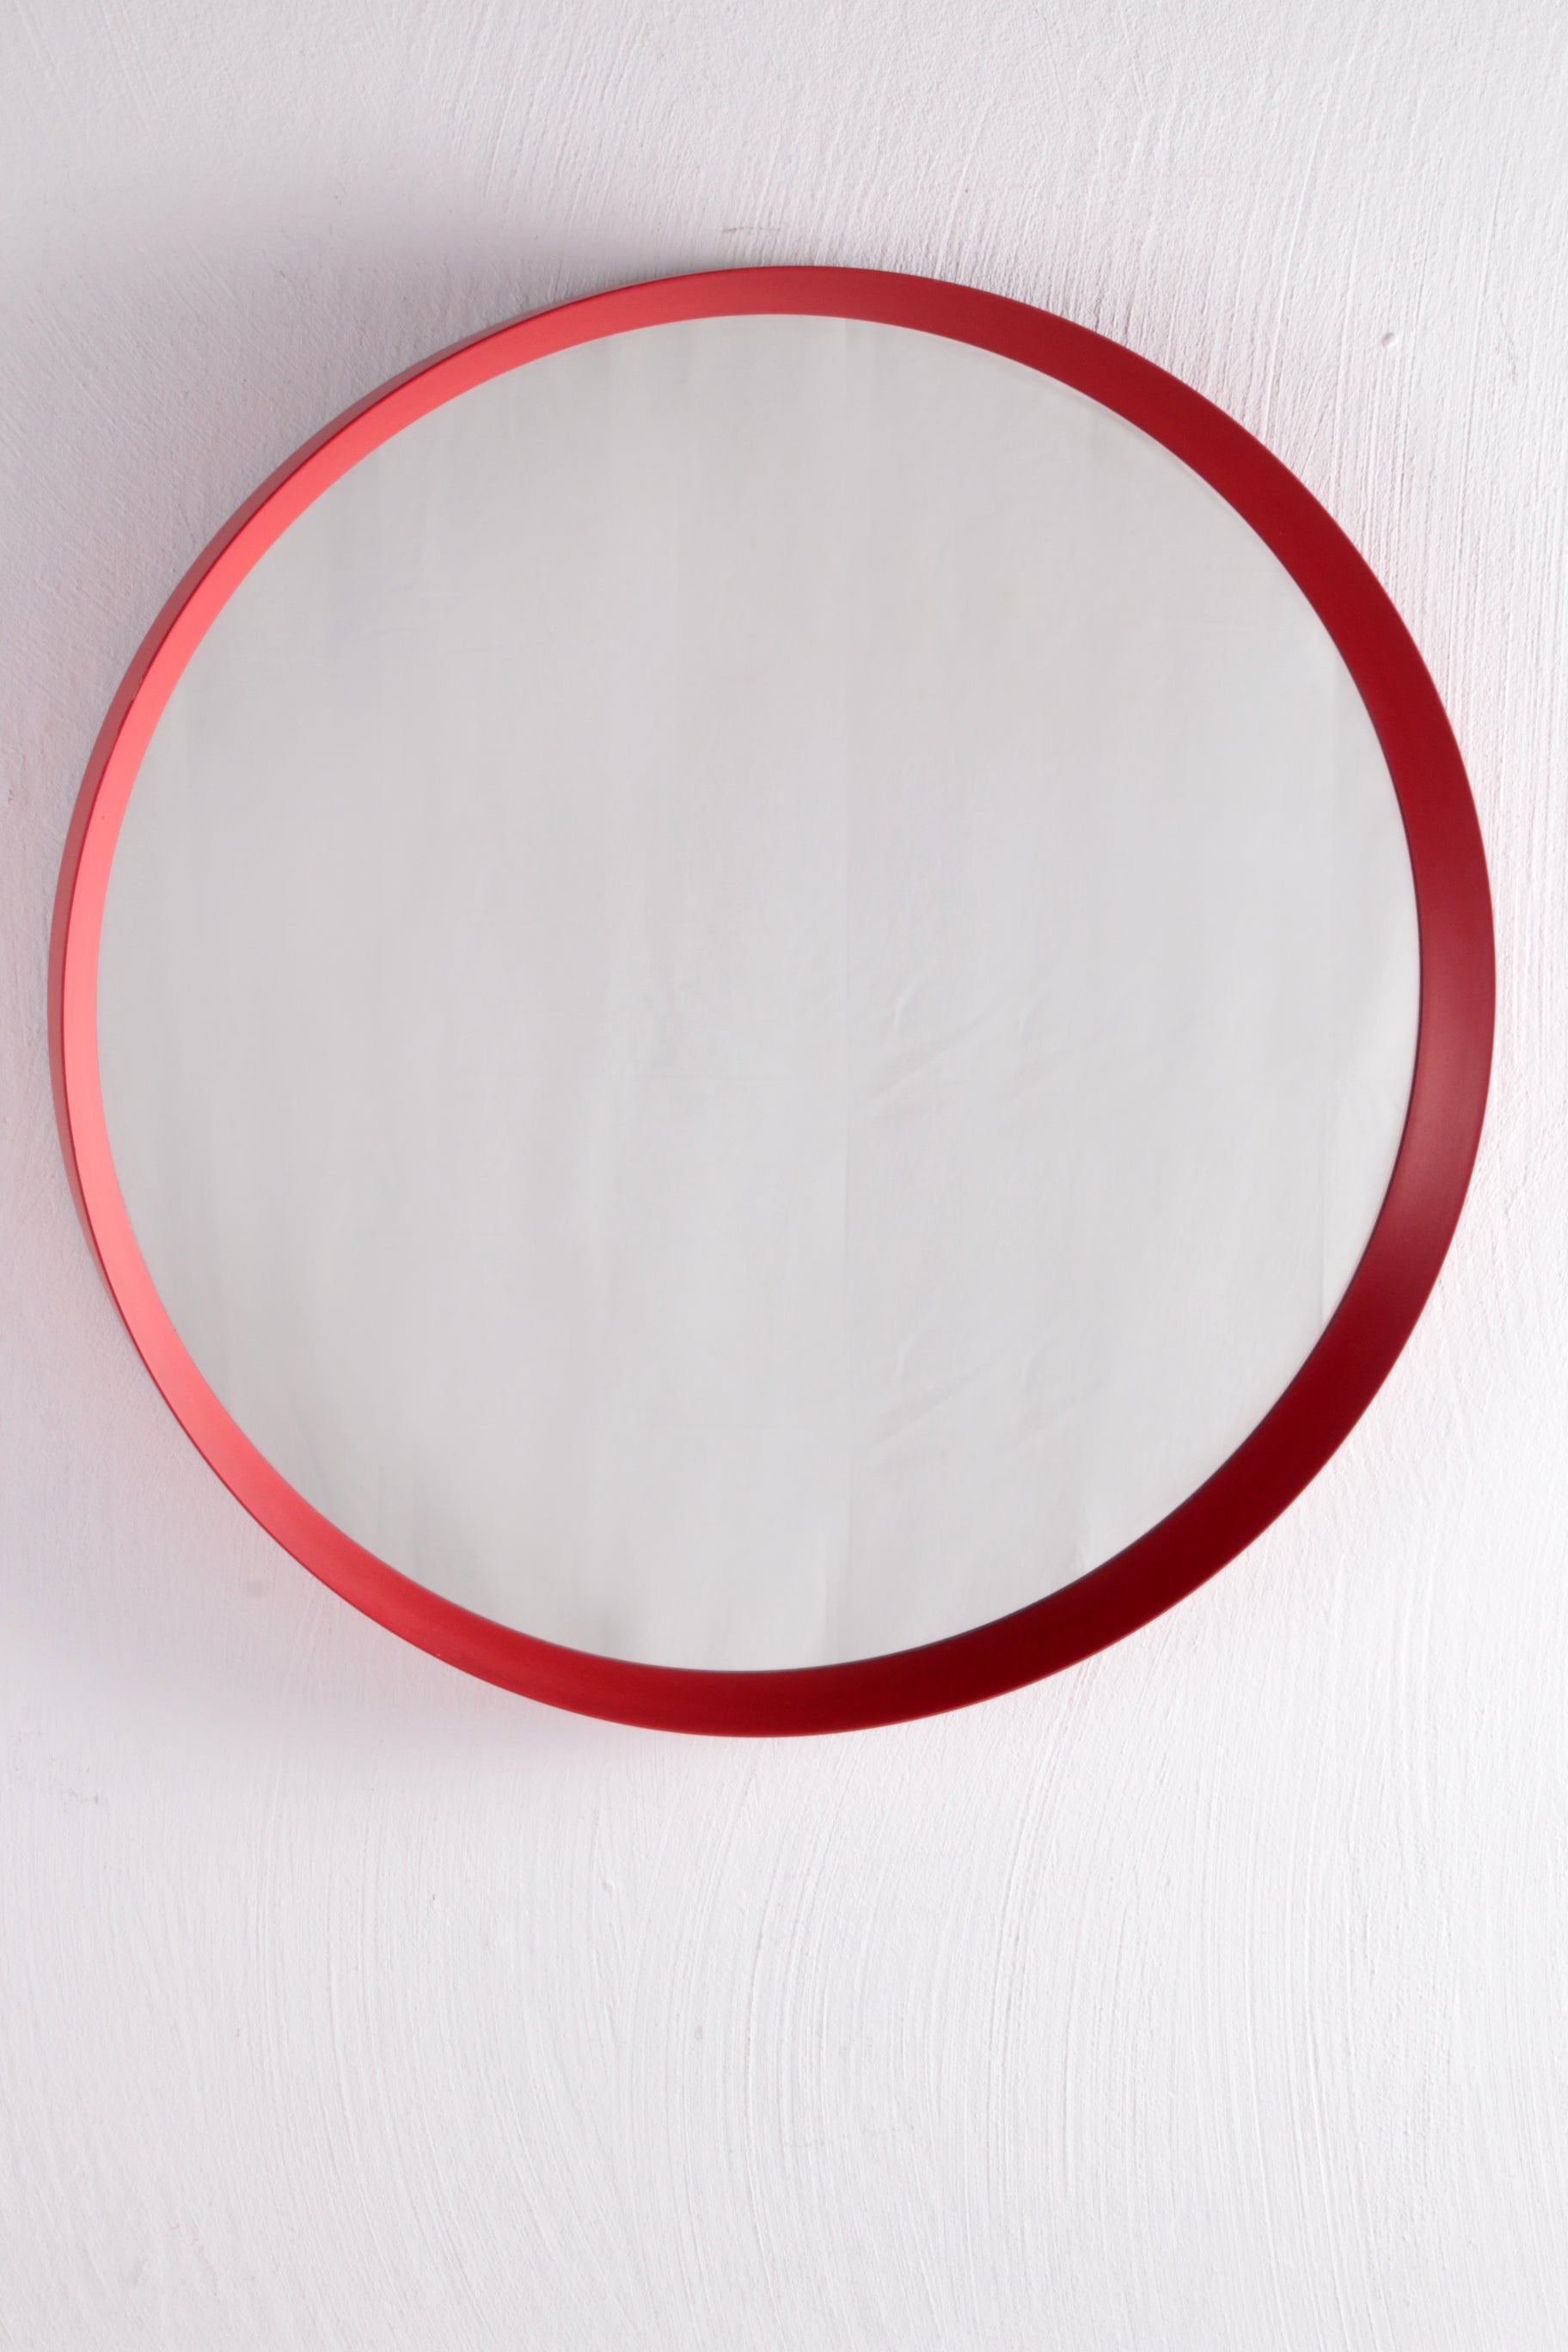 consensus Oordeel oosters Vintage red round plastic mirror 60 cm diameter from the 1960s. –  Timeless-Art